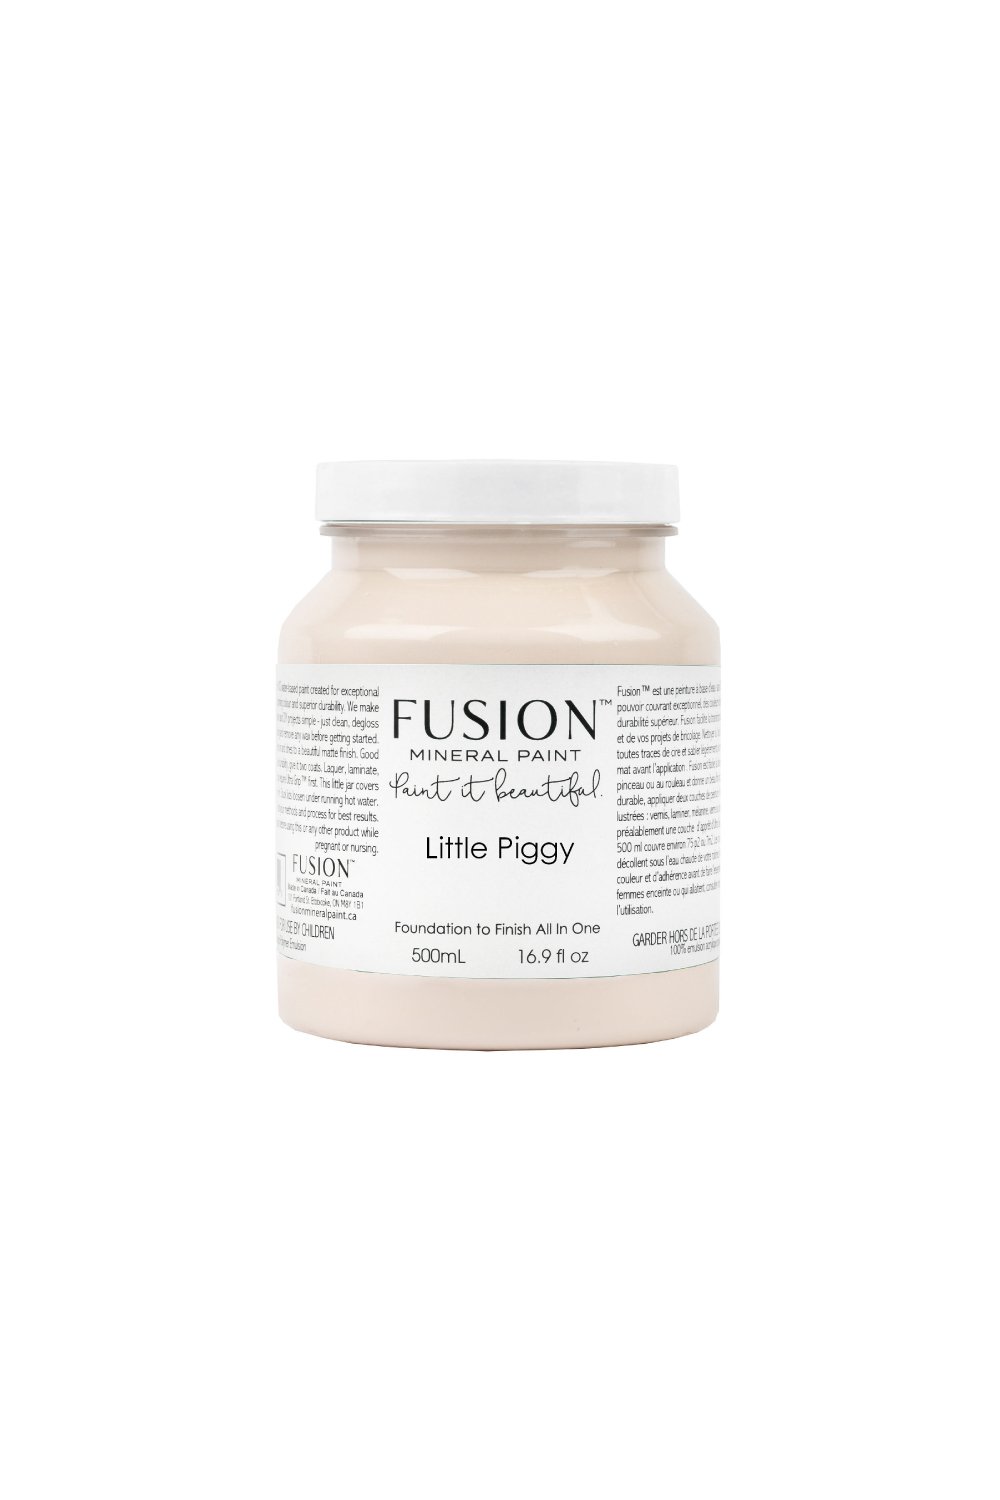 Fusion Mineral Paint vernice ecologica color rosa